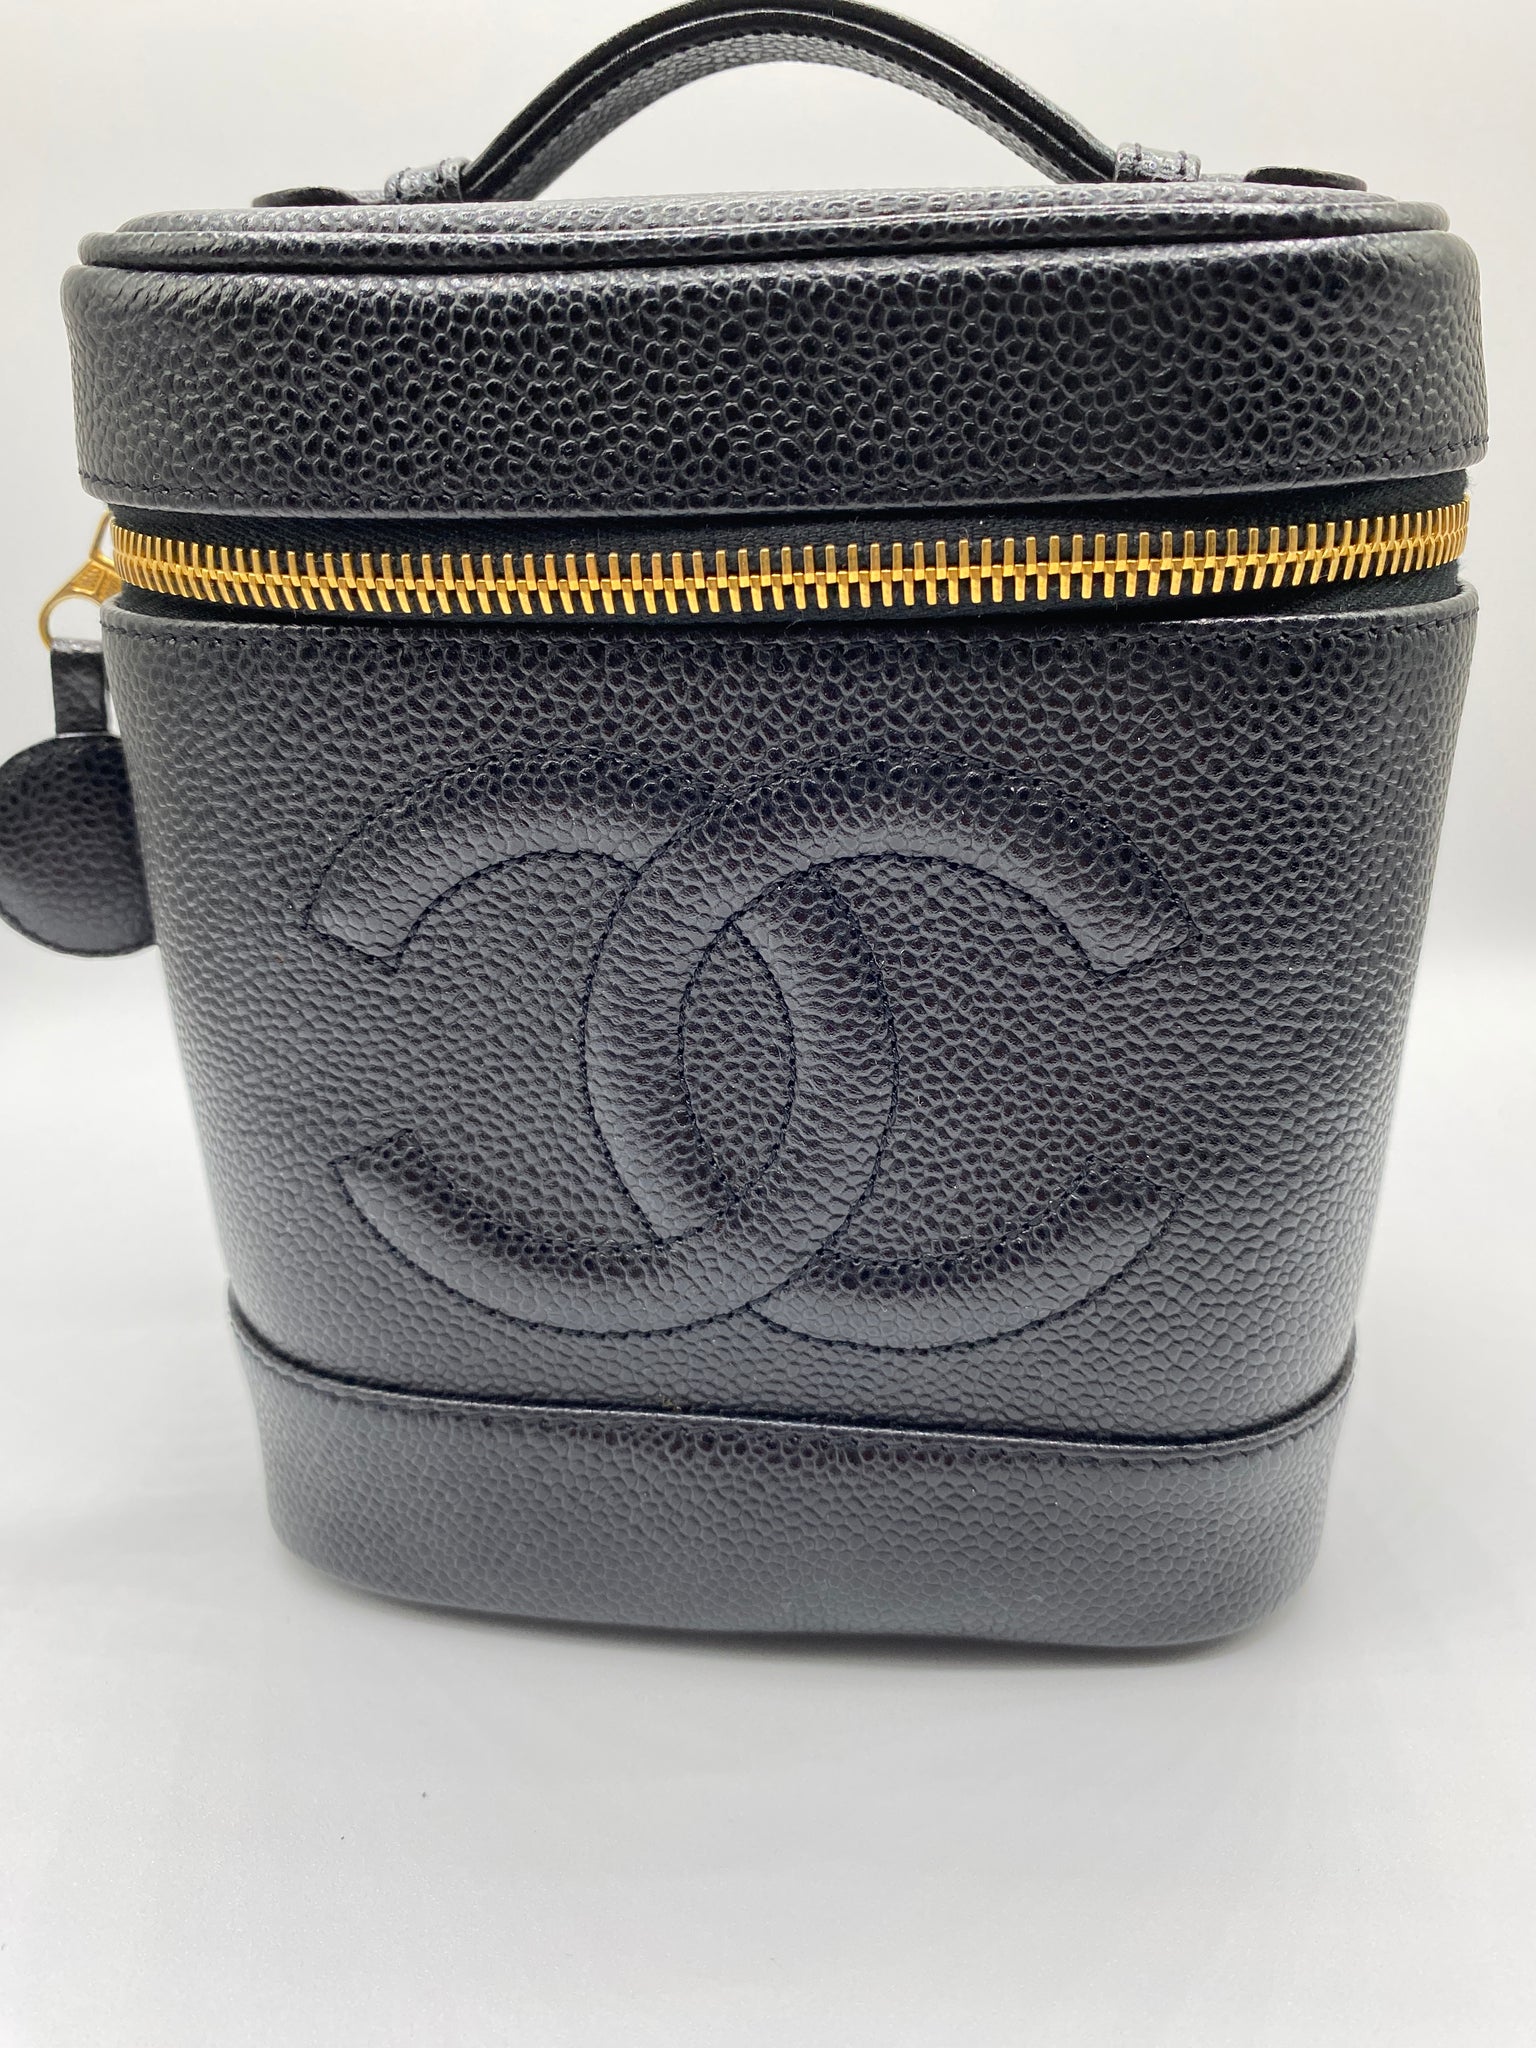 Chanel Classic Vanity Cosmetic Case Pouch NEW Auth  Chanel classic Chanel  bag Cosmetic case